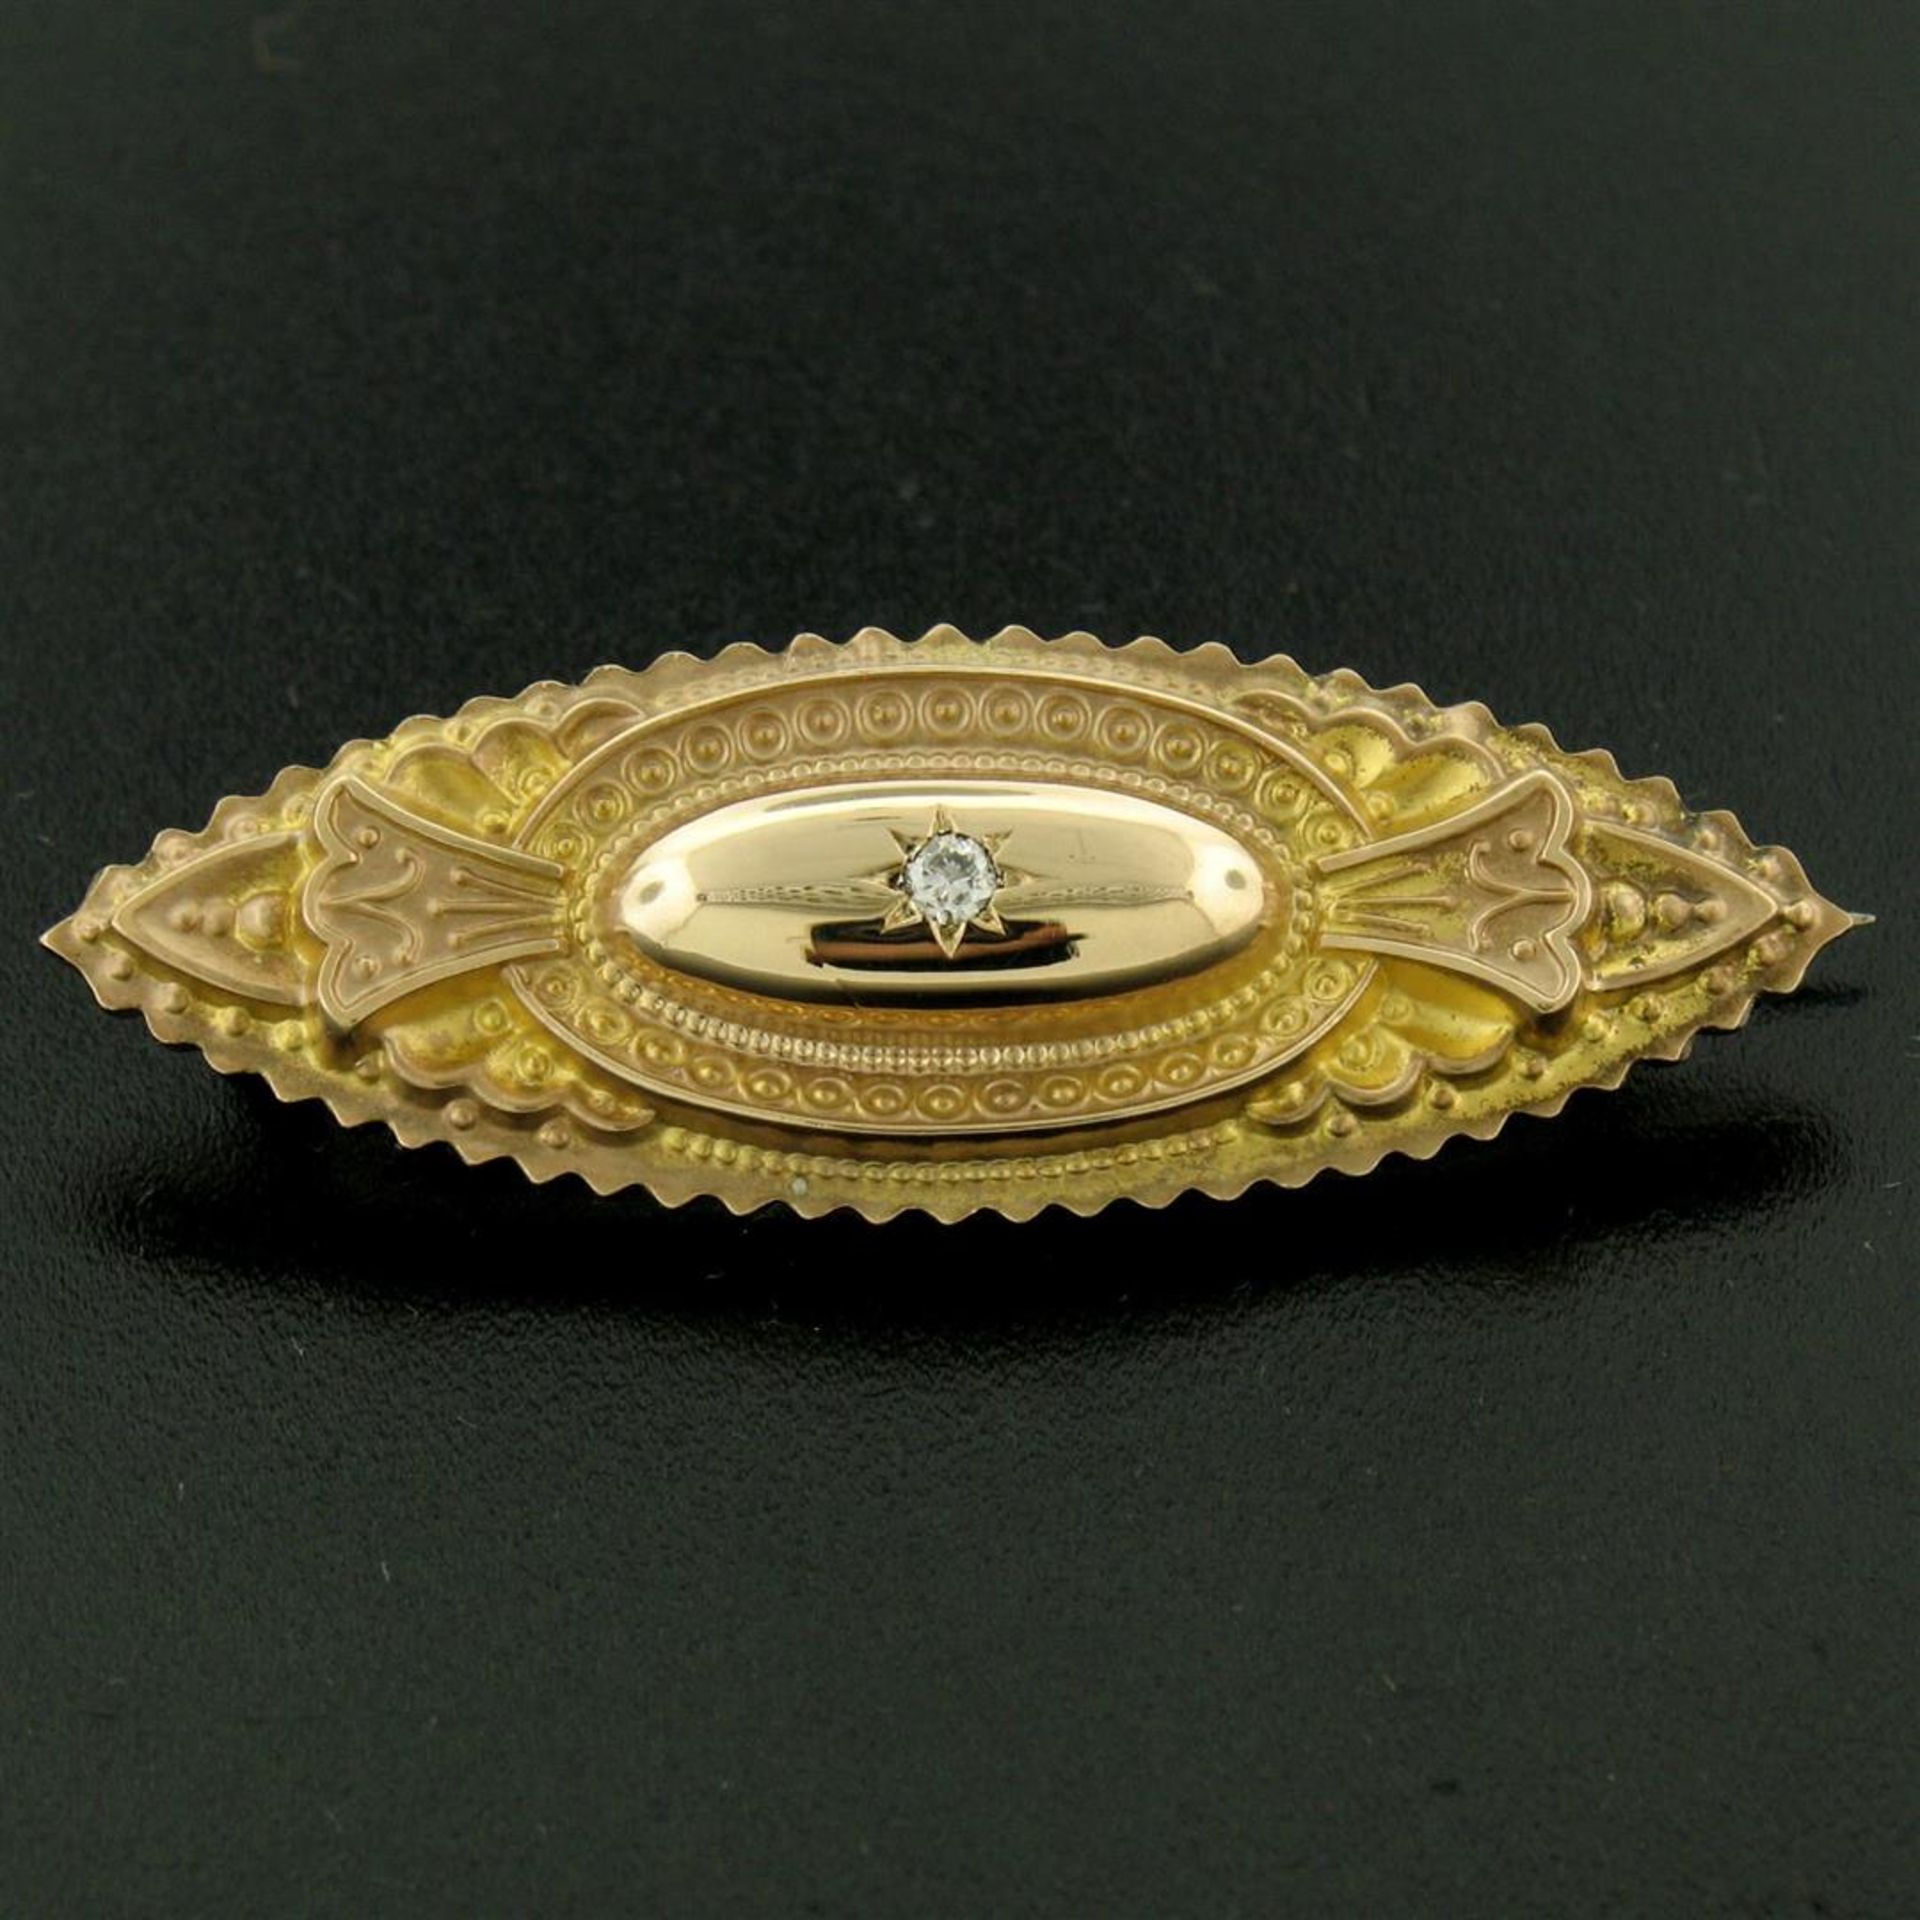 9k Yellow Gold .10 ctw Diamond Marquise Shaped Etched Brooch Pin - Image 2 of 9